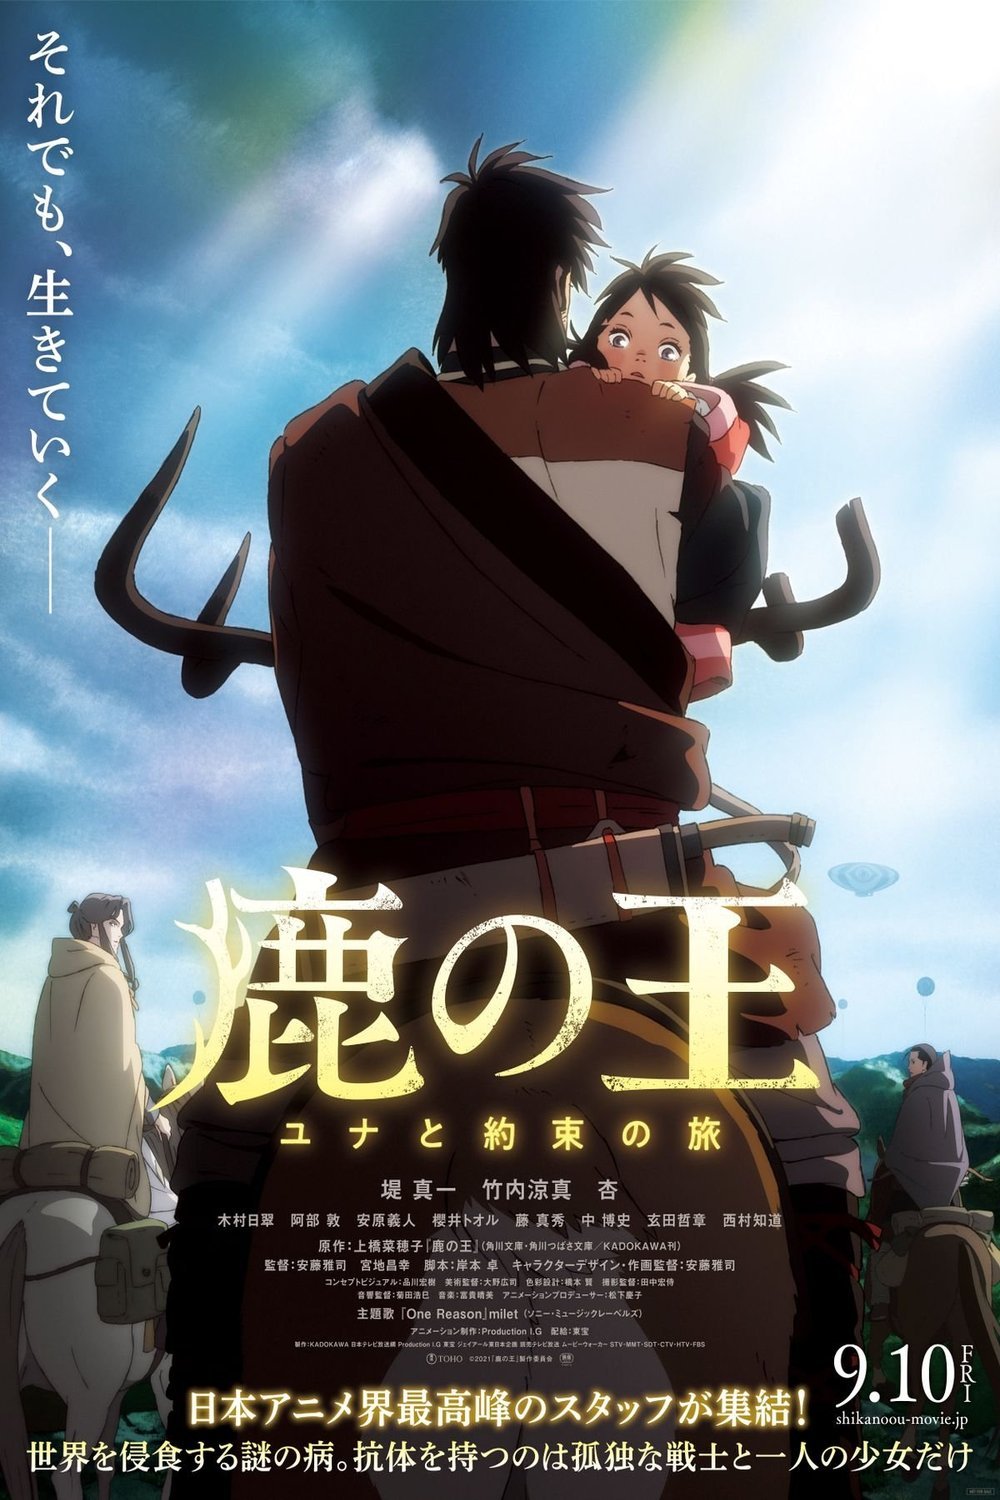 Japanese poster of the movie The Deer King